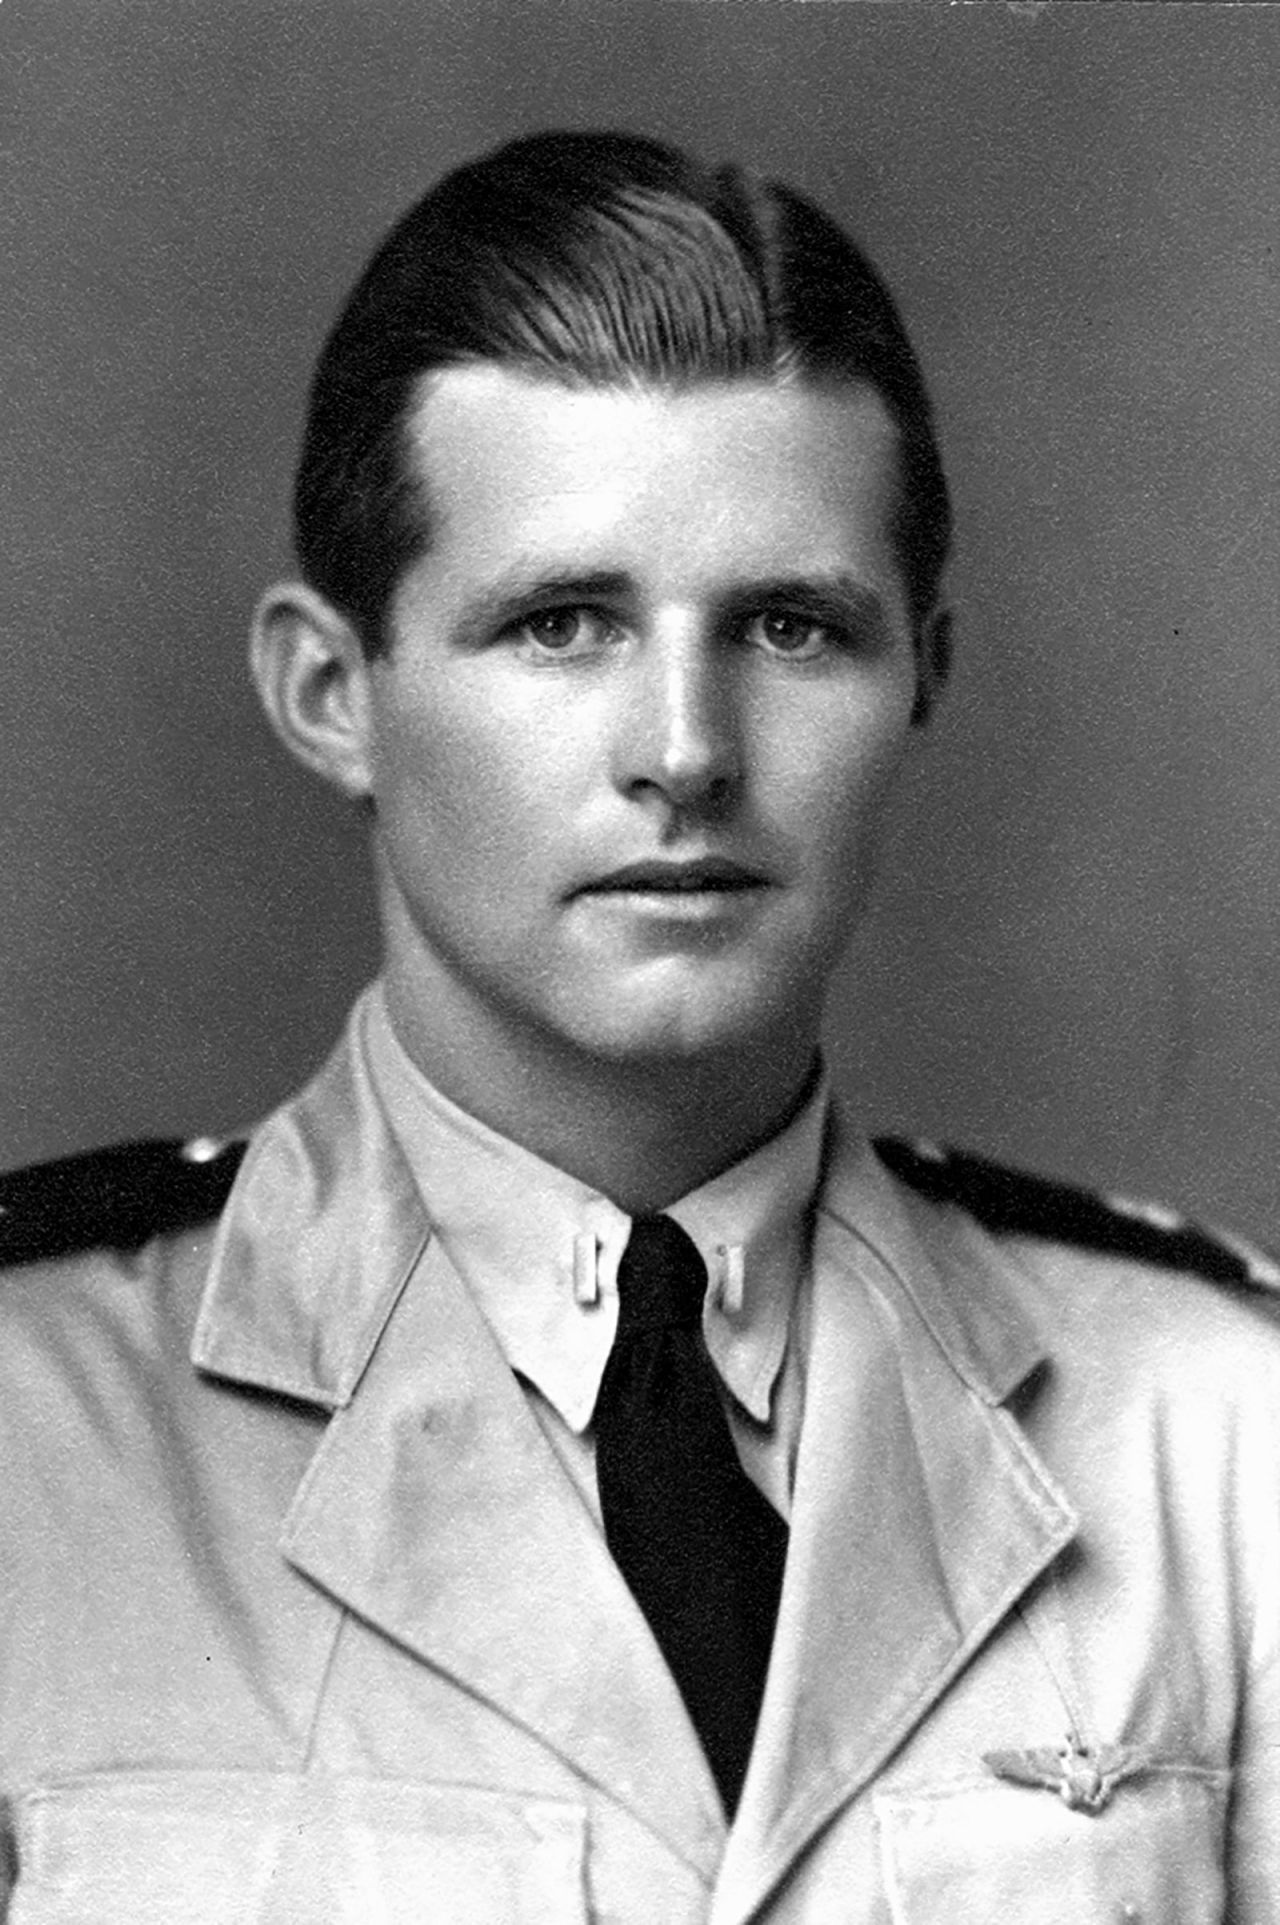 Joseph P. Kennedy Jr., the eldest son of Joseph and Rose Kennedy, died at 29 in a plane crash during World War II.